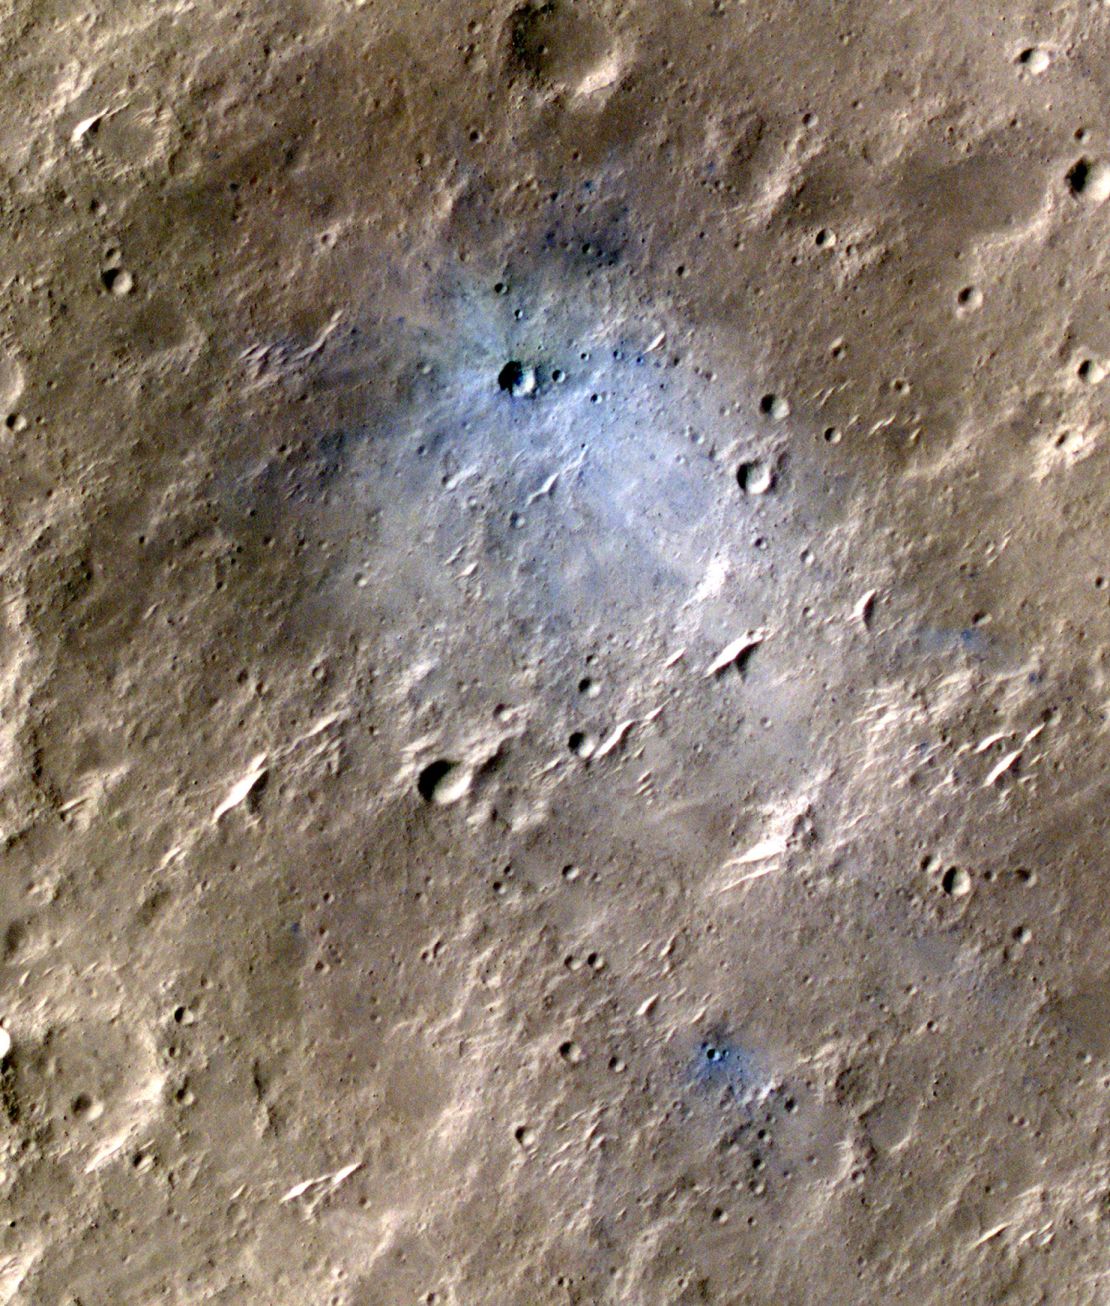 NASA's Mars Reconnaissance Orbiter captured an image of a meteoroid impact that was later associated with a seismic event detected by the agency's InSight lander. This crater was formed on May 27, 2020.